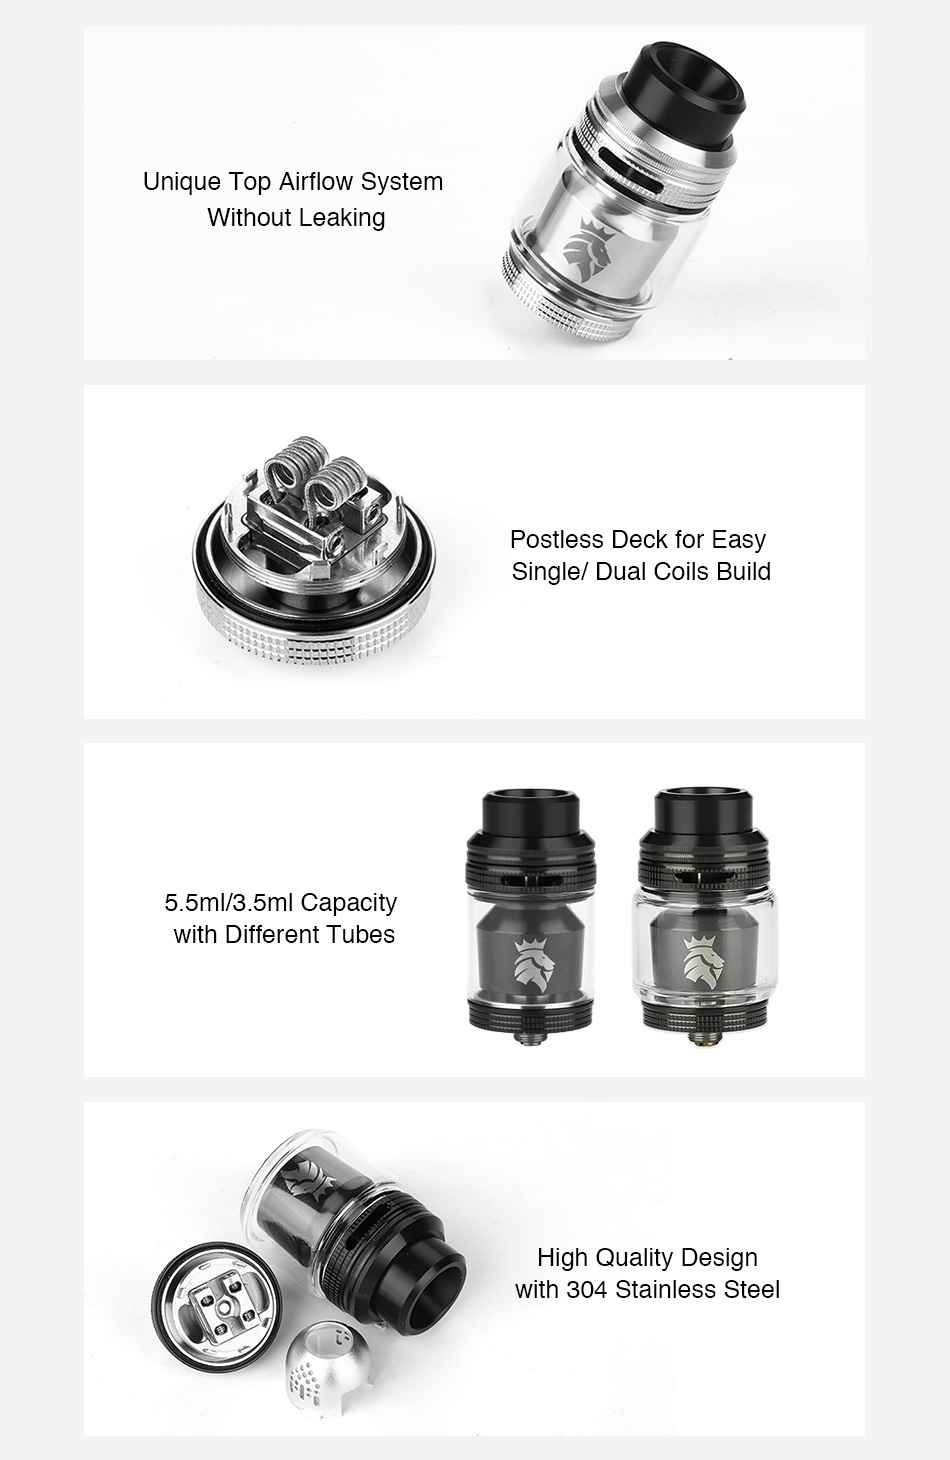 KAEES Solomon 3 RTA 5.5ml Unique Top Airflow System Without Leaking Postless Deck for Easy Single  Dual Coils Build    5 5m 3 5ml Capacity with different tubes High Quality Design with 304 Stainless stee